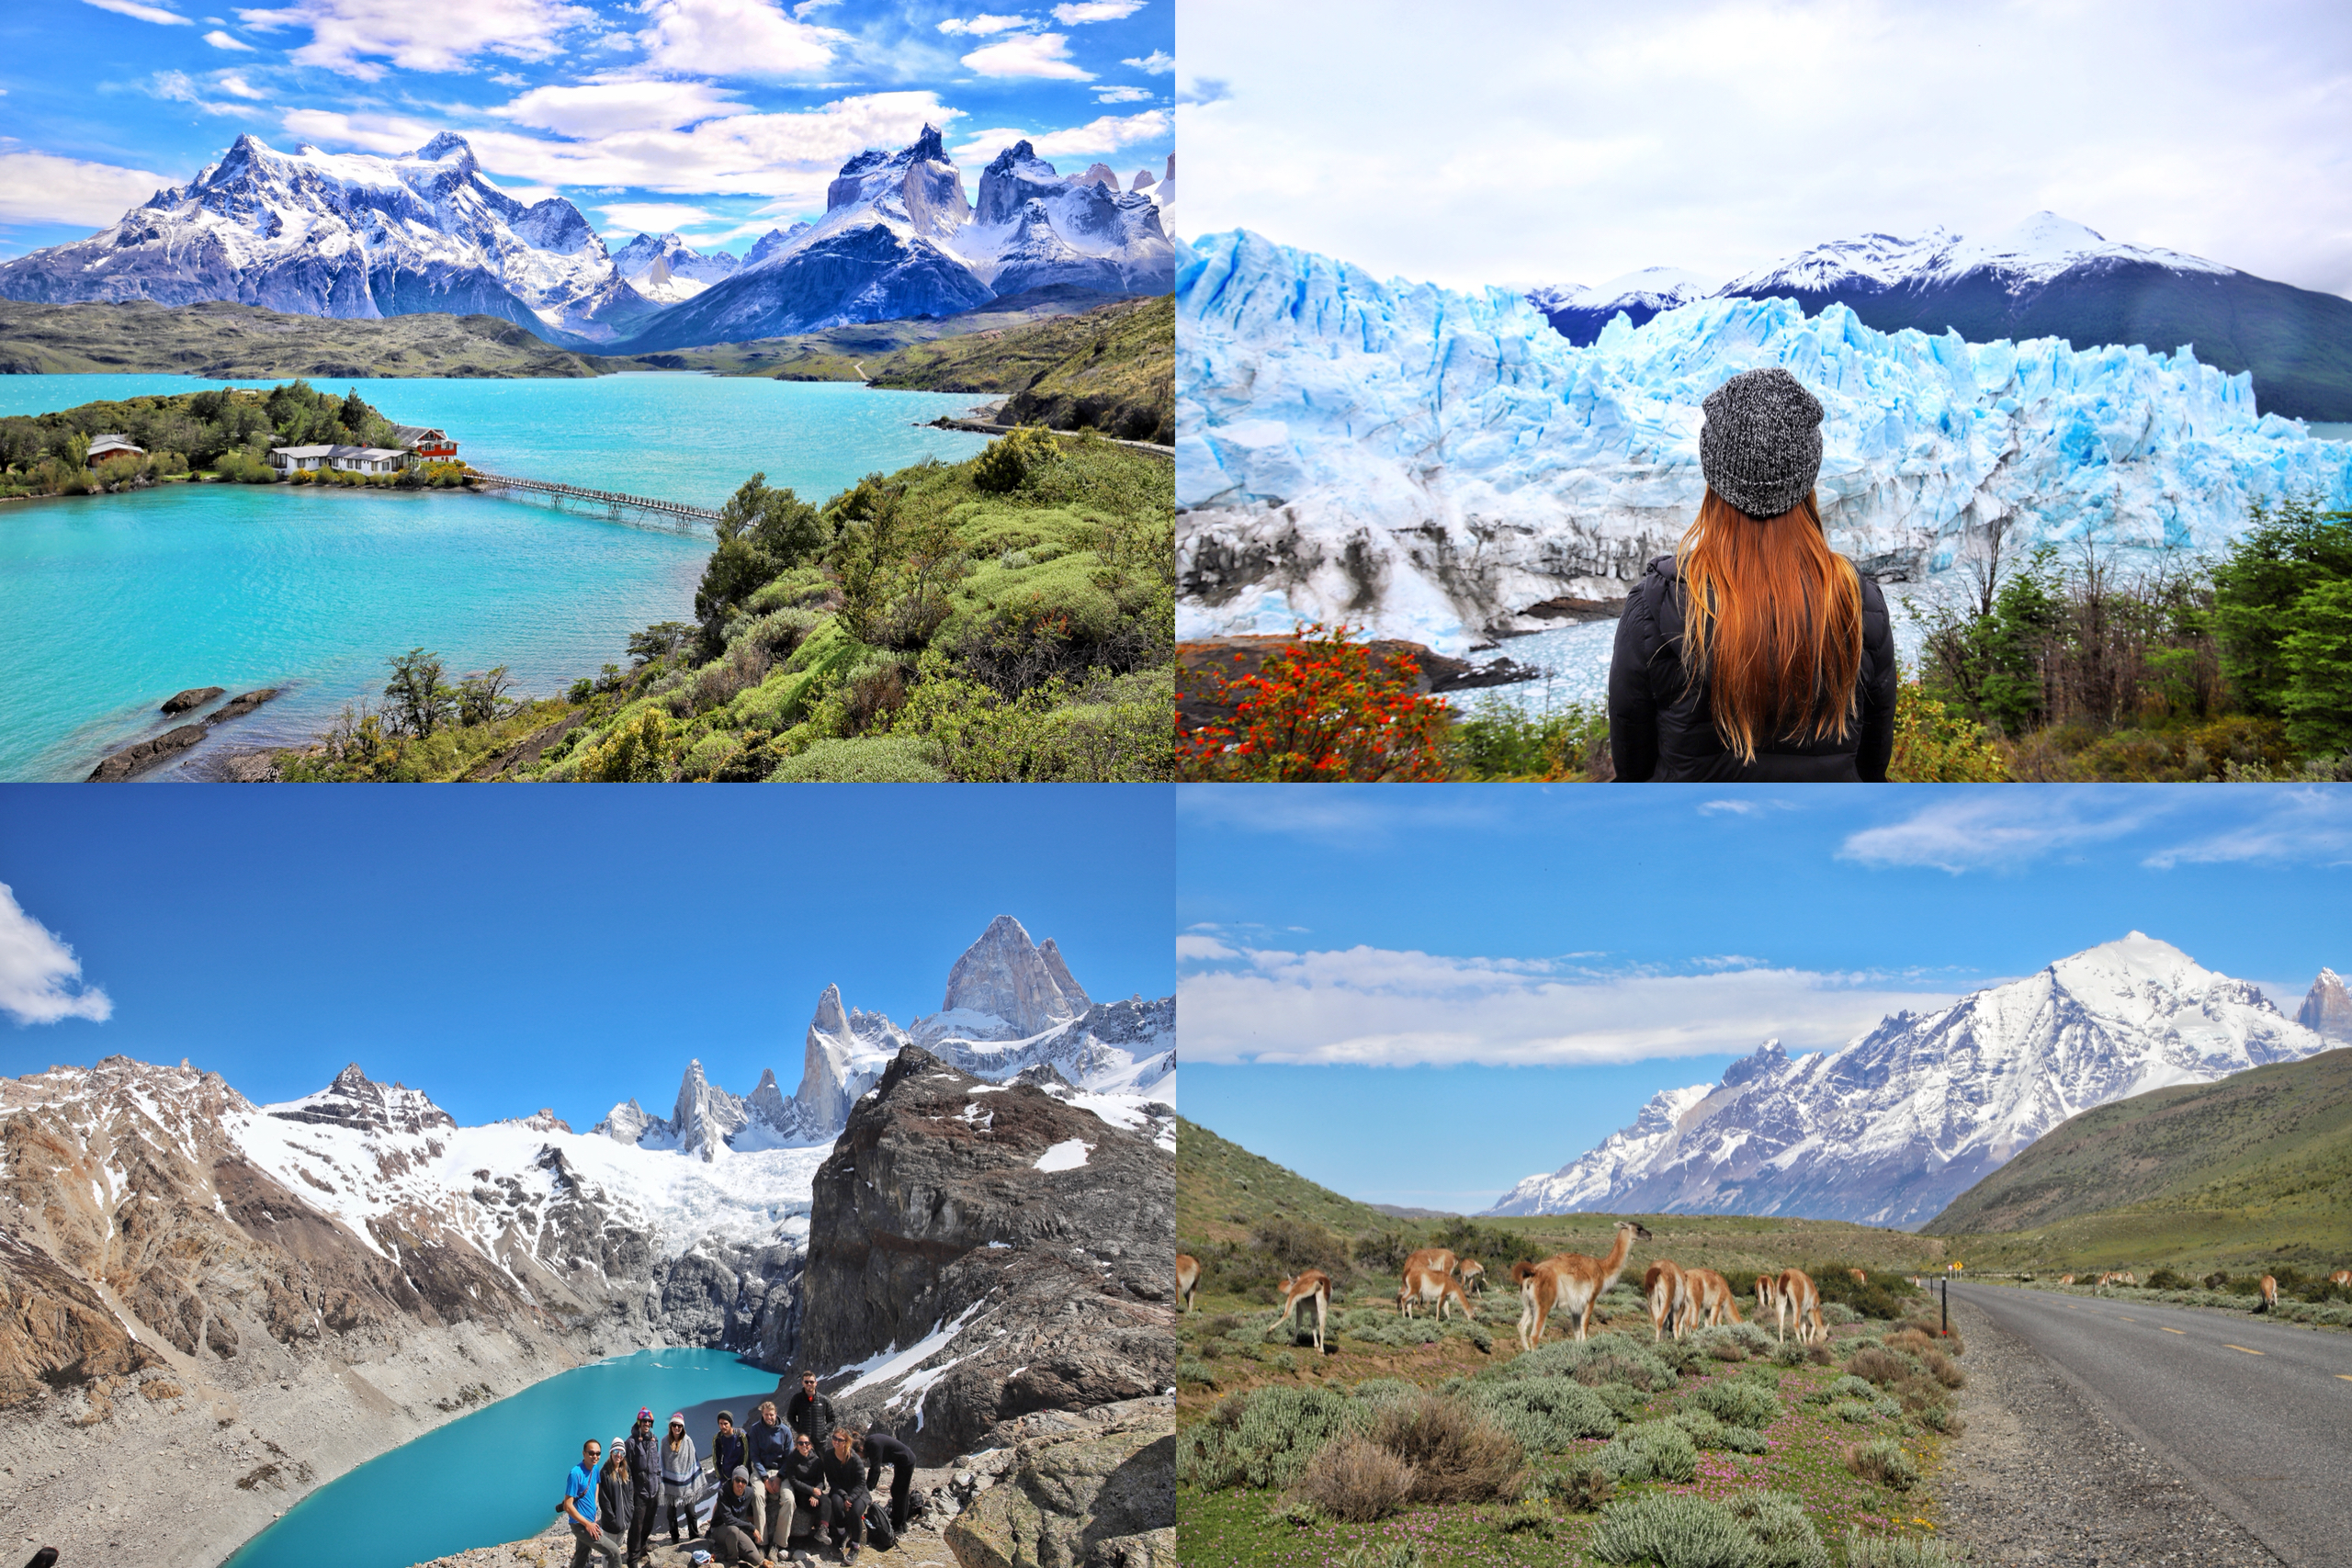 One in Patagonia itinerary: is it possible without hiking? - The Wanderlust Bug